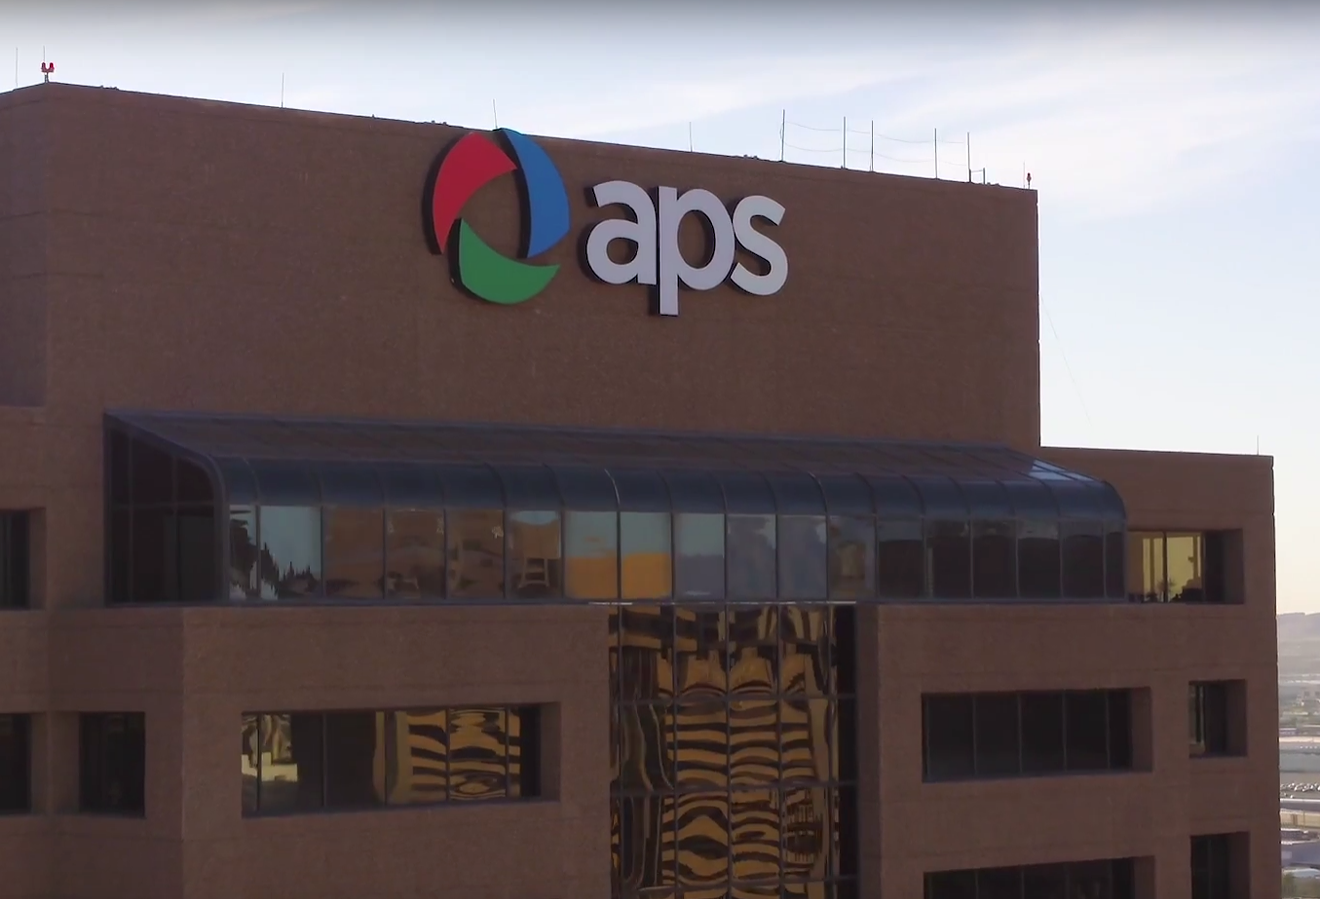 APS is the largest electric utility in Arizona, with more than 1.2 million captive customers.